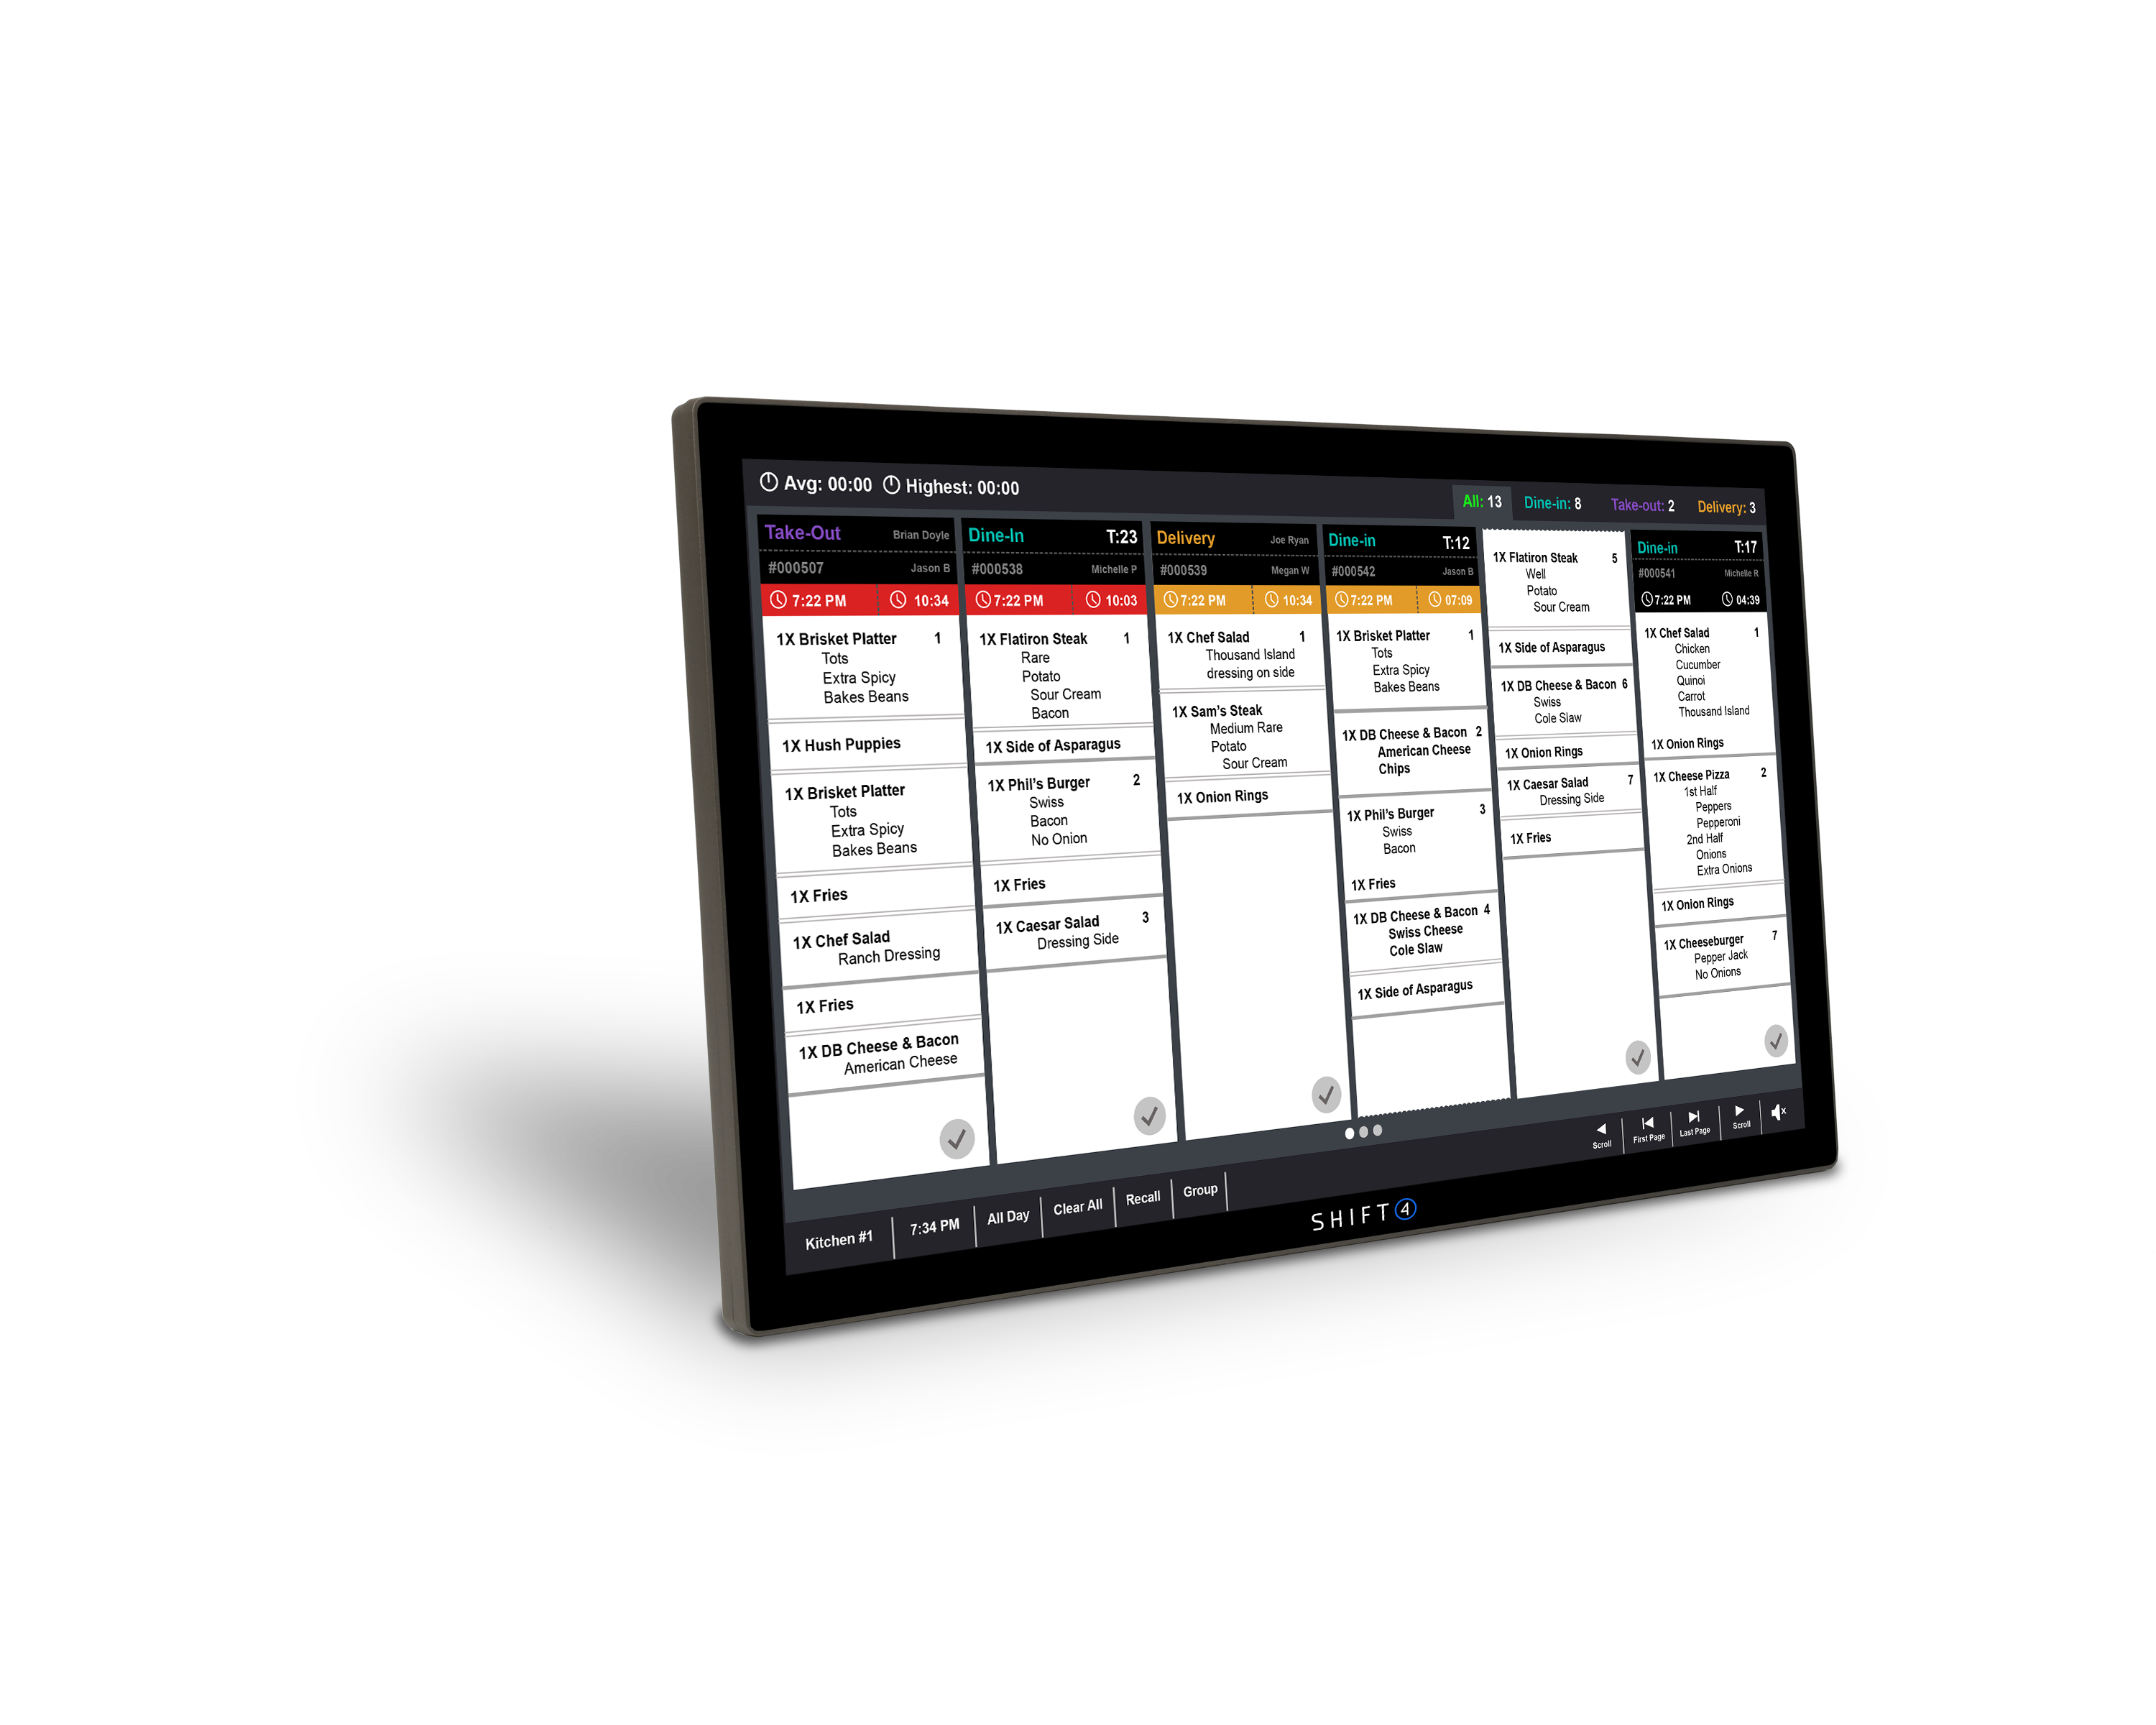 SkyTab POS Integrates with OpenTable